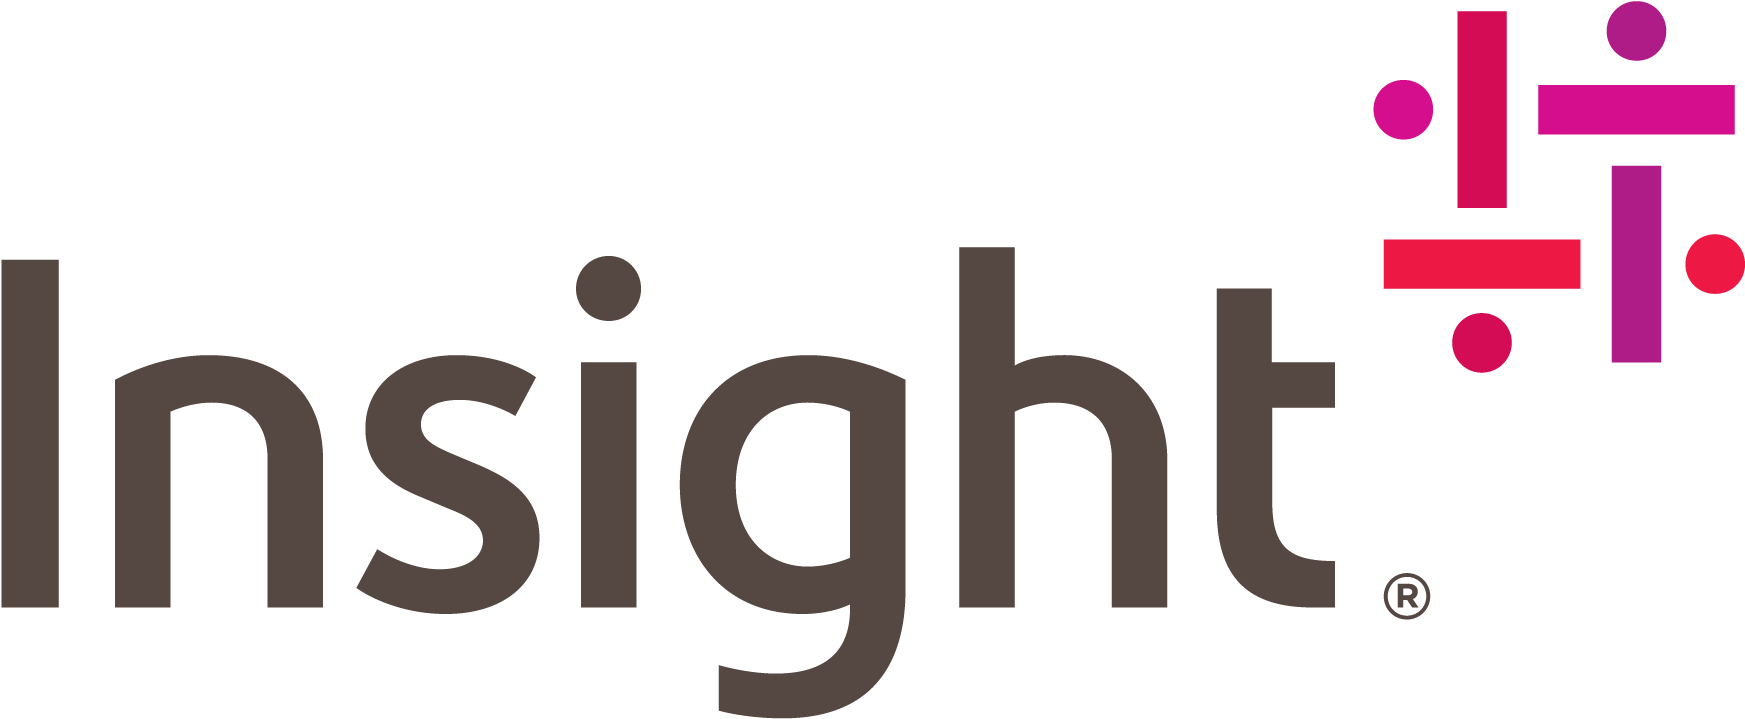 Insight Logo Png - Insight Technology Solutions Gmbh (2117x1088)